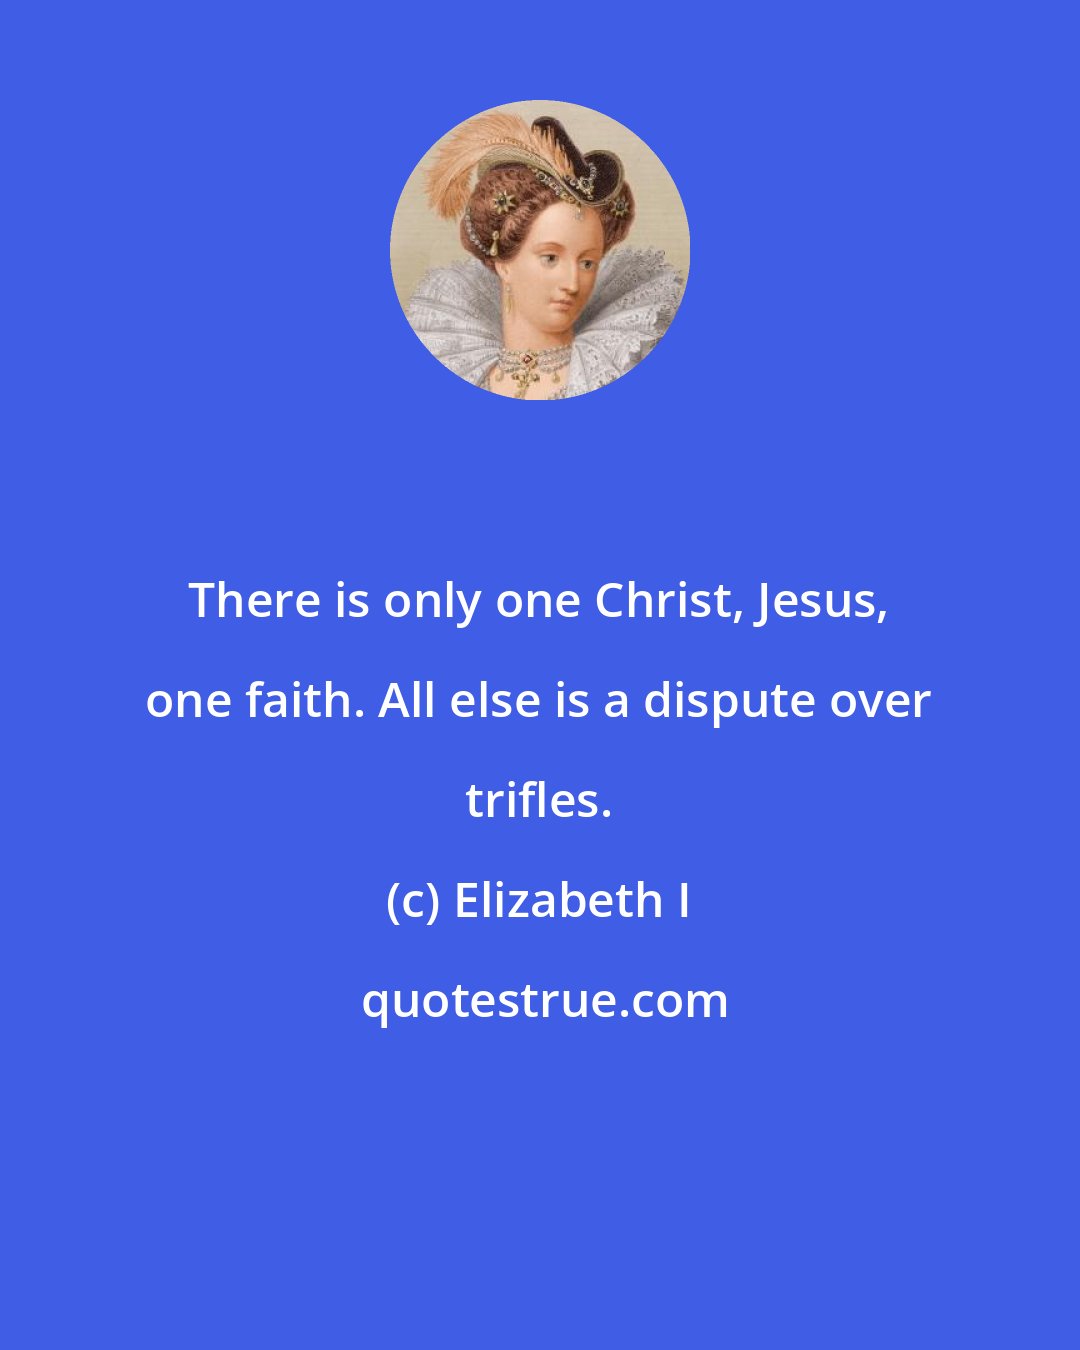 Elizabeth I: There is only one Christ, Jesus, one faith. All else is a dispute over trifles.